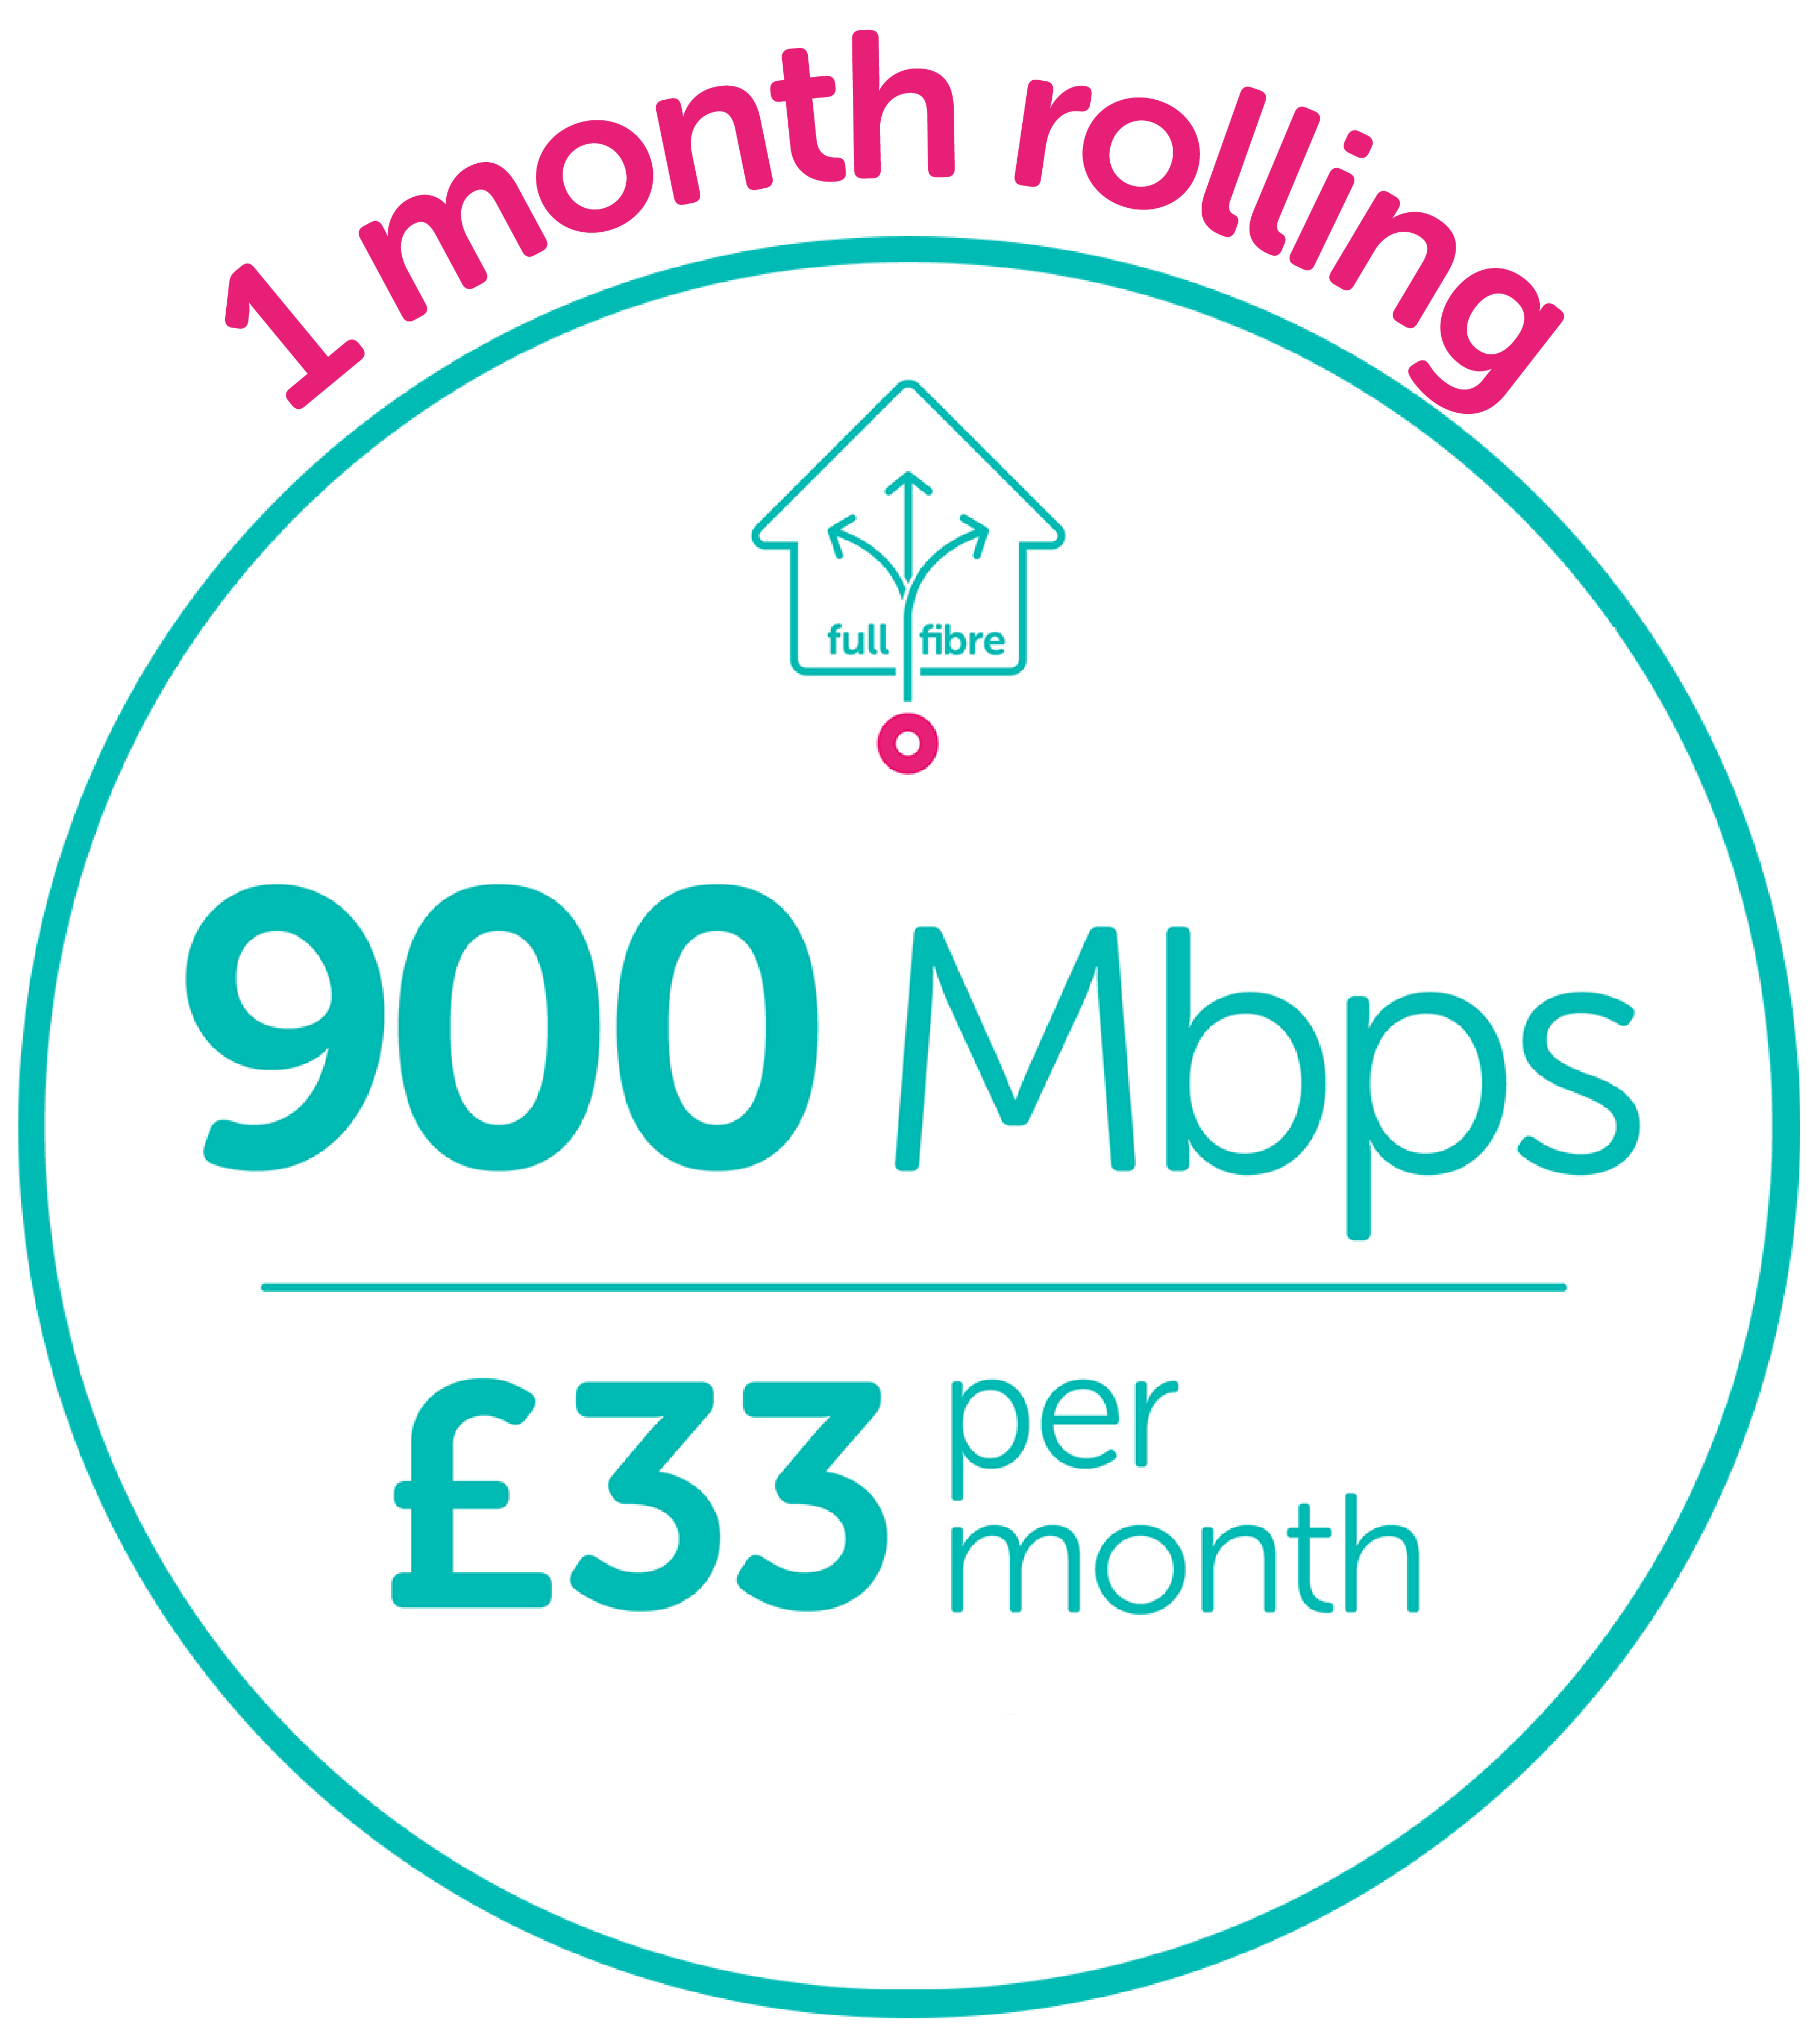 £33 a month on a 1 month rolling contract | toob full-fibre broadband